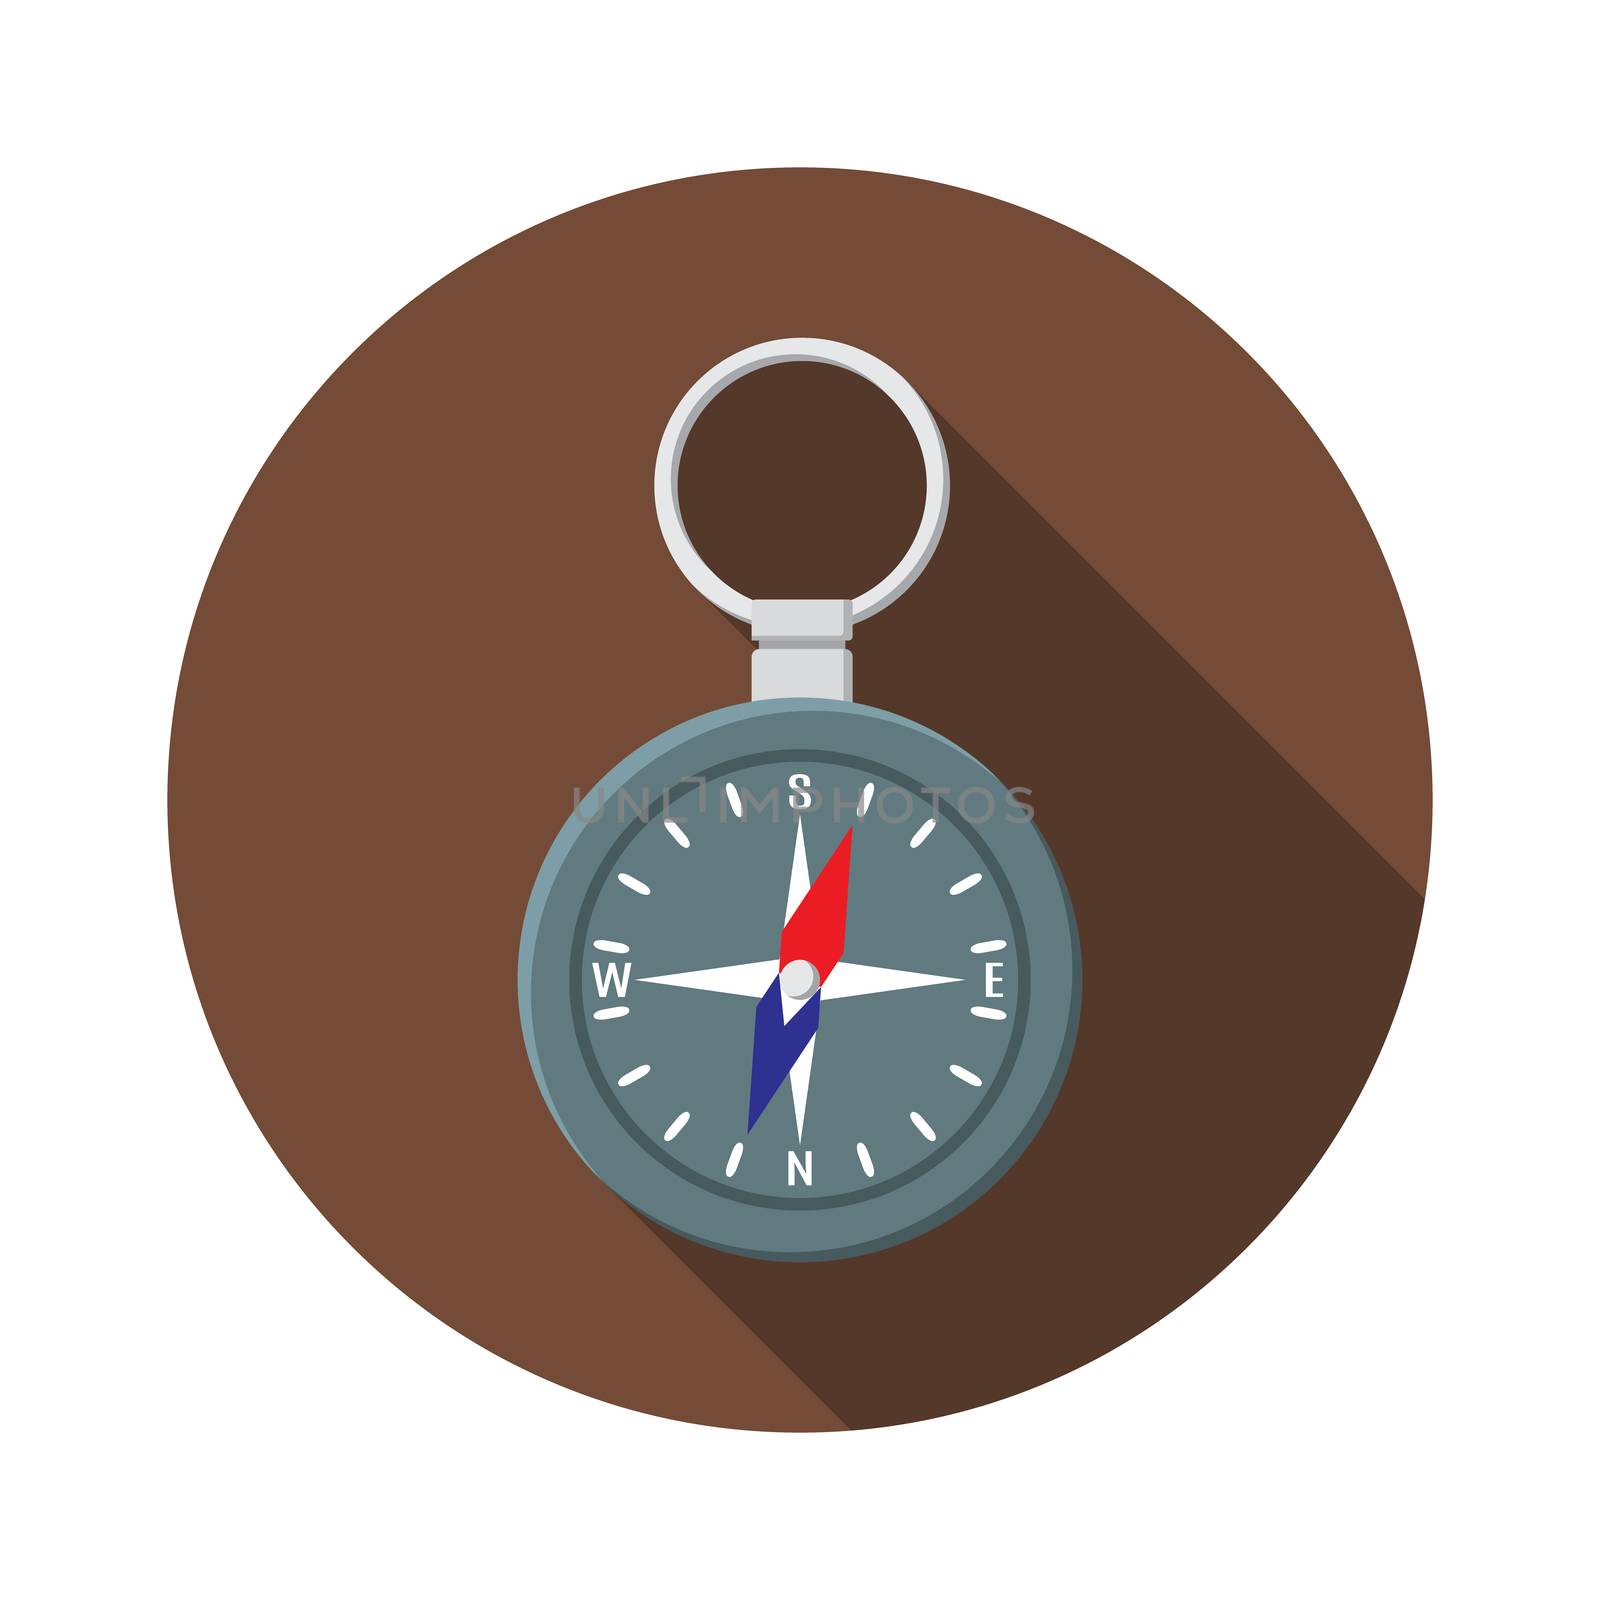 Flat design modern vector illustration of compass icon, camping, hiking and exploring equipment with long shadow by Lemon_workshop